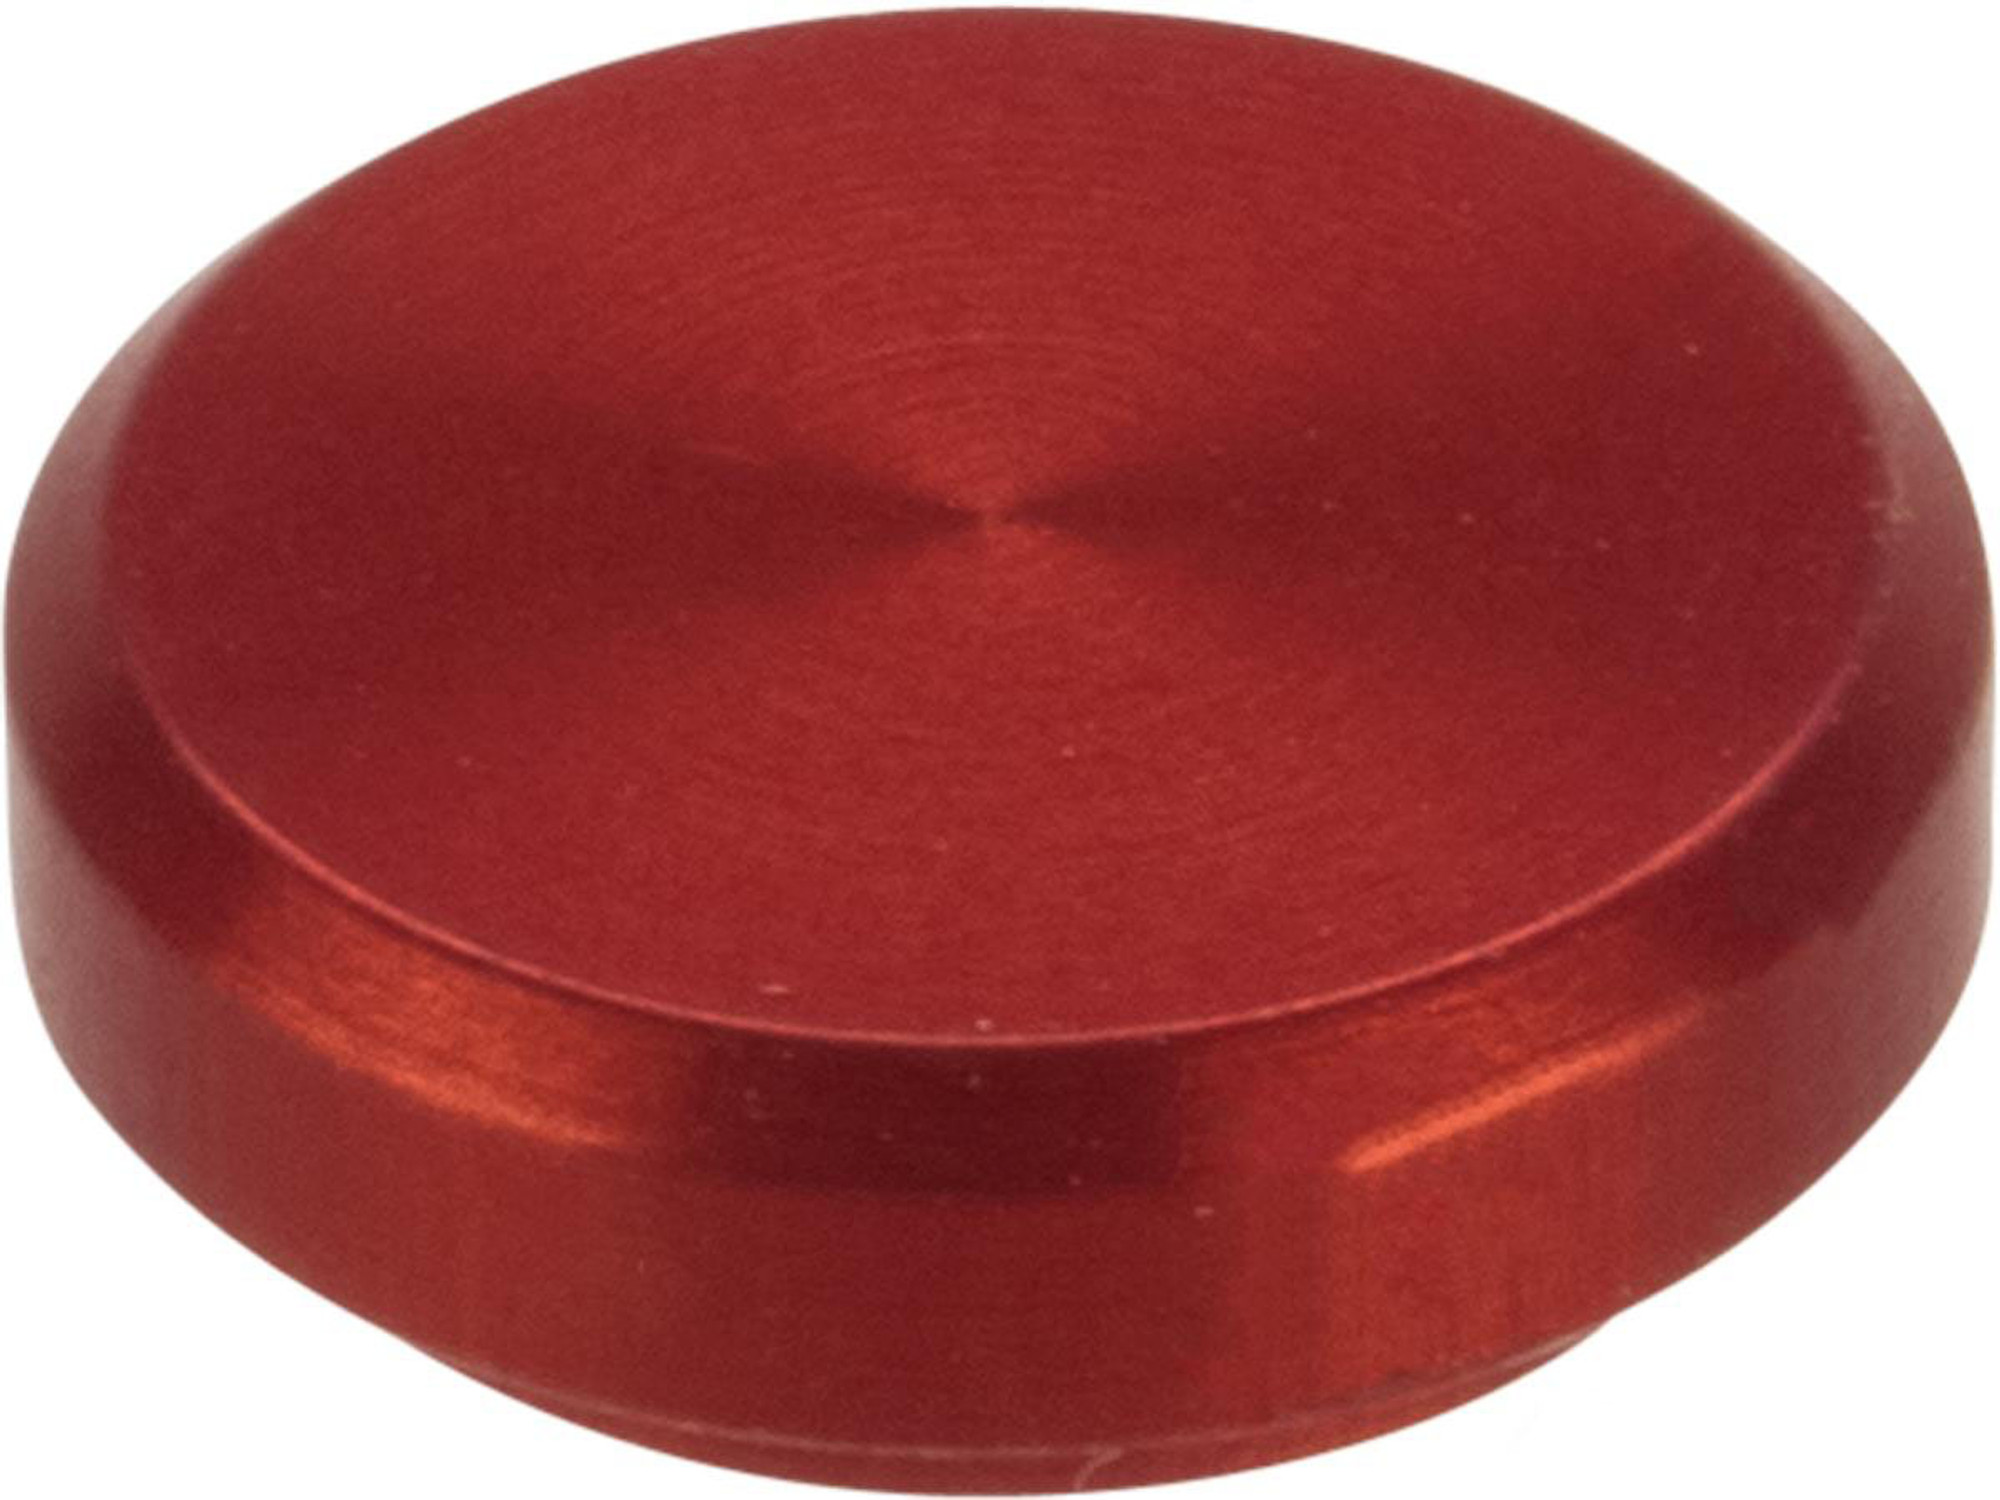 Retro Arms CNC Machined Aluminum Fire Selector Cover / Plug for M4 / M16 Series AEGs (Color: Red)